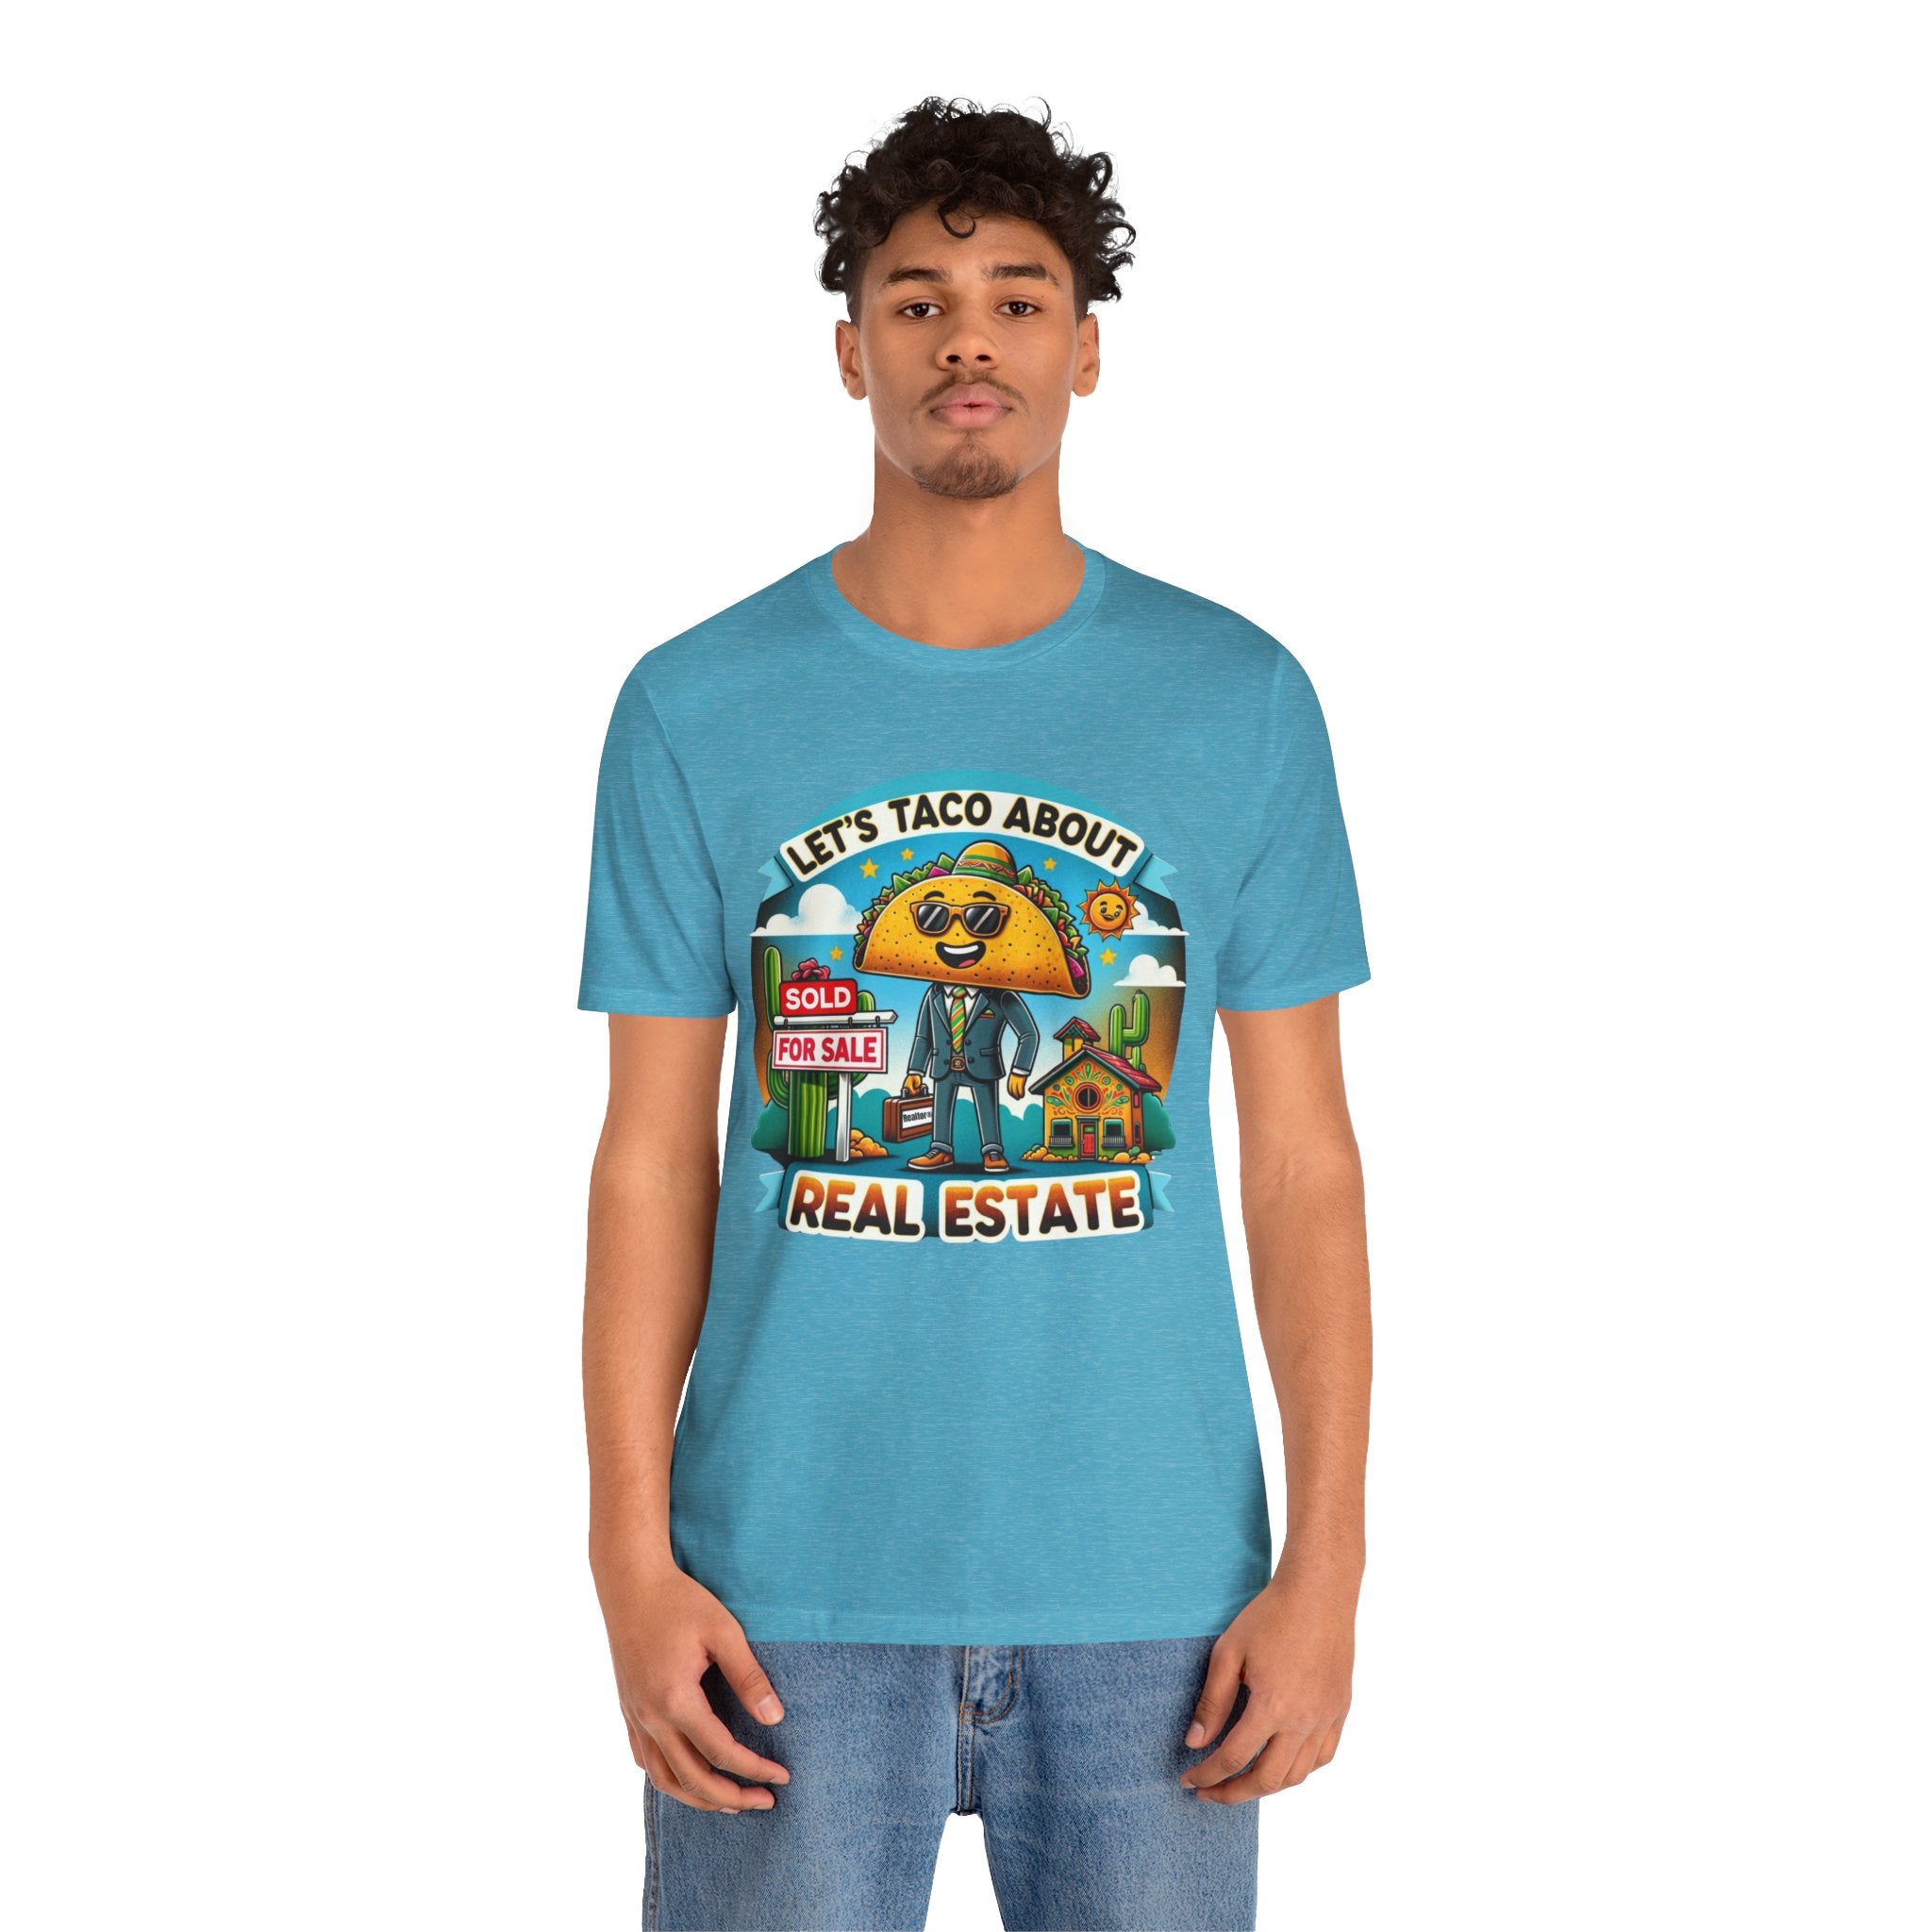 Lets Taco About Real Estate - Unisex Jersey Short Sleeve Tee